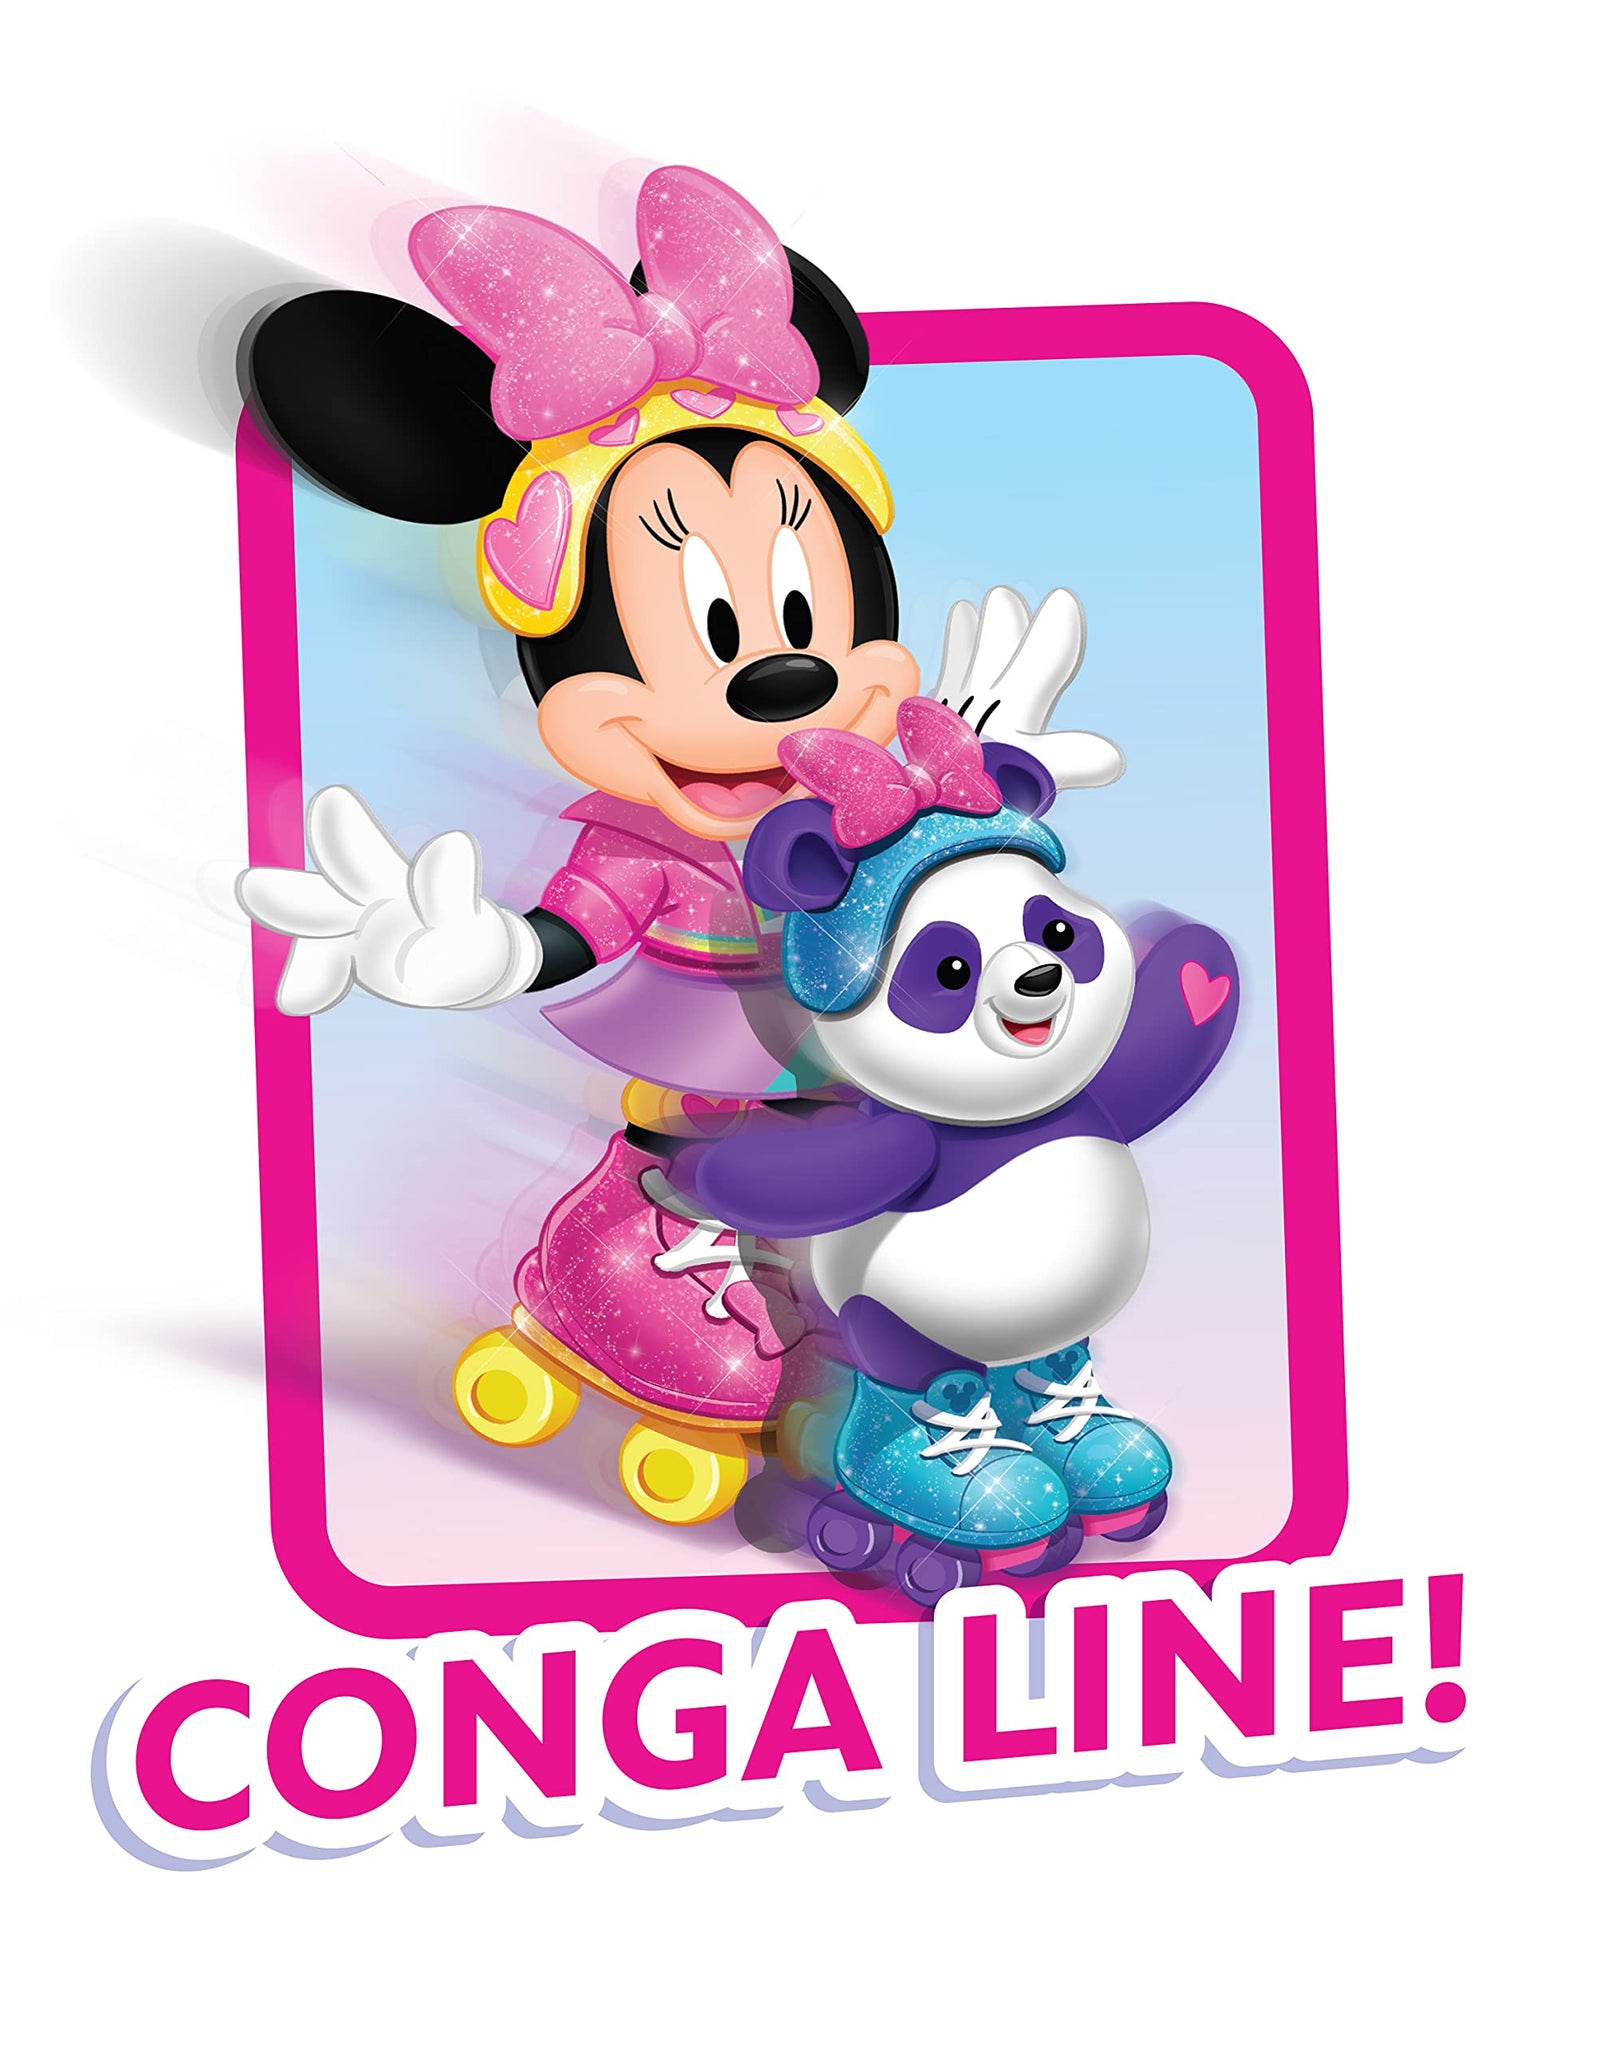 Disney Junior Minnie Mouse Roller-Skating Party Minnie Mouse, Interactive Light Up Feature Plush with Talking, Singing, and Moving, Includes a Roller-Skating Panda, by Just Play